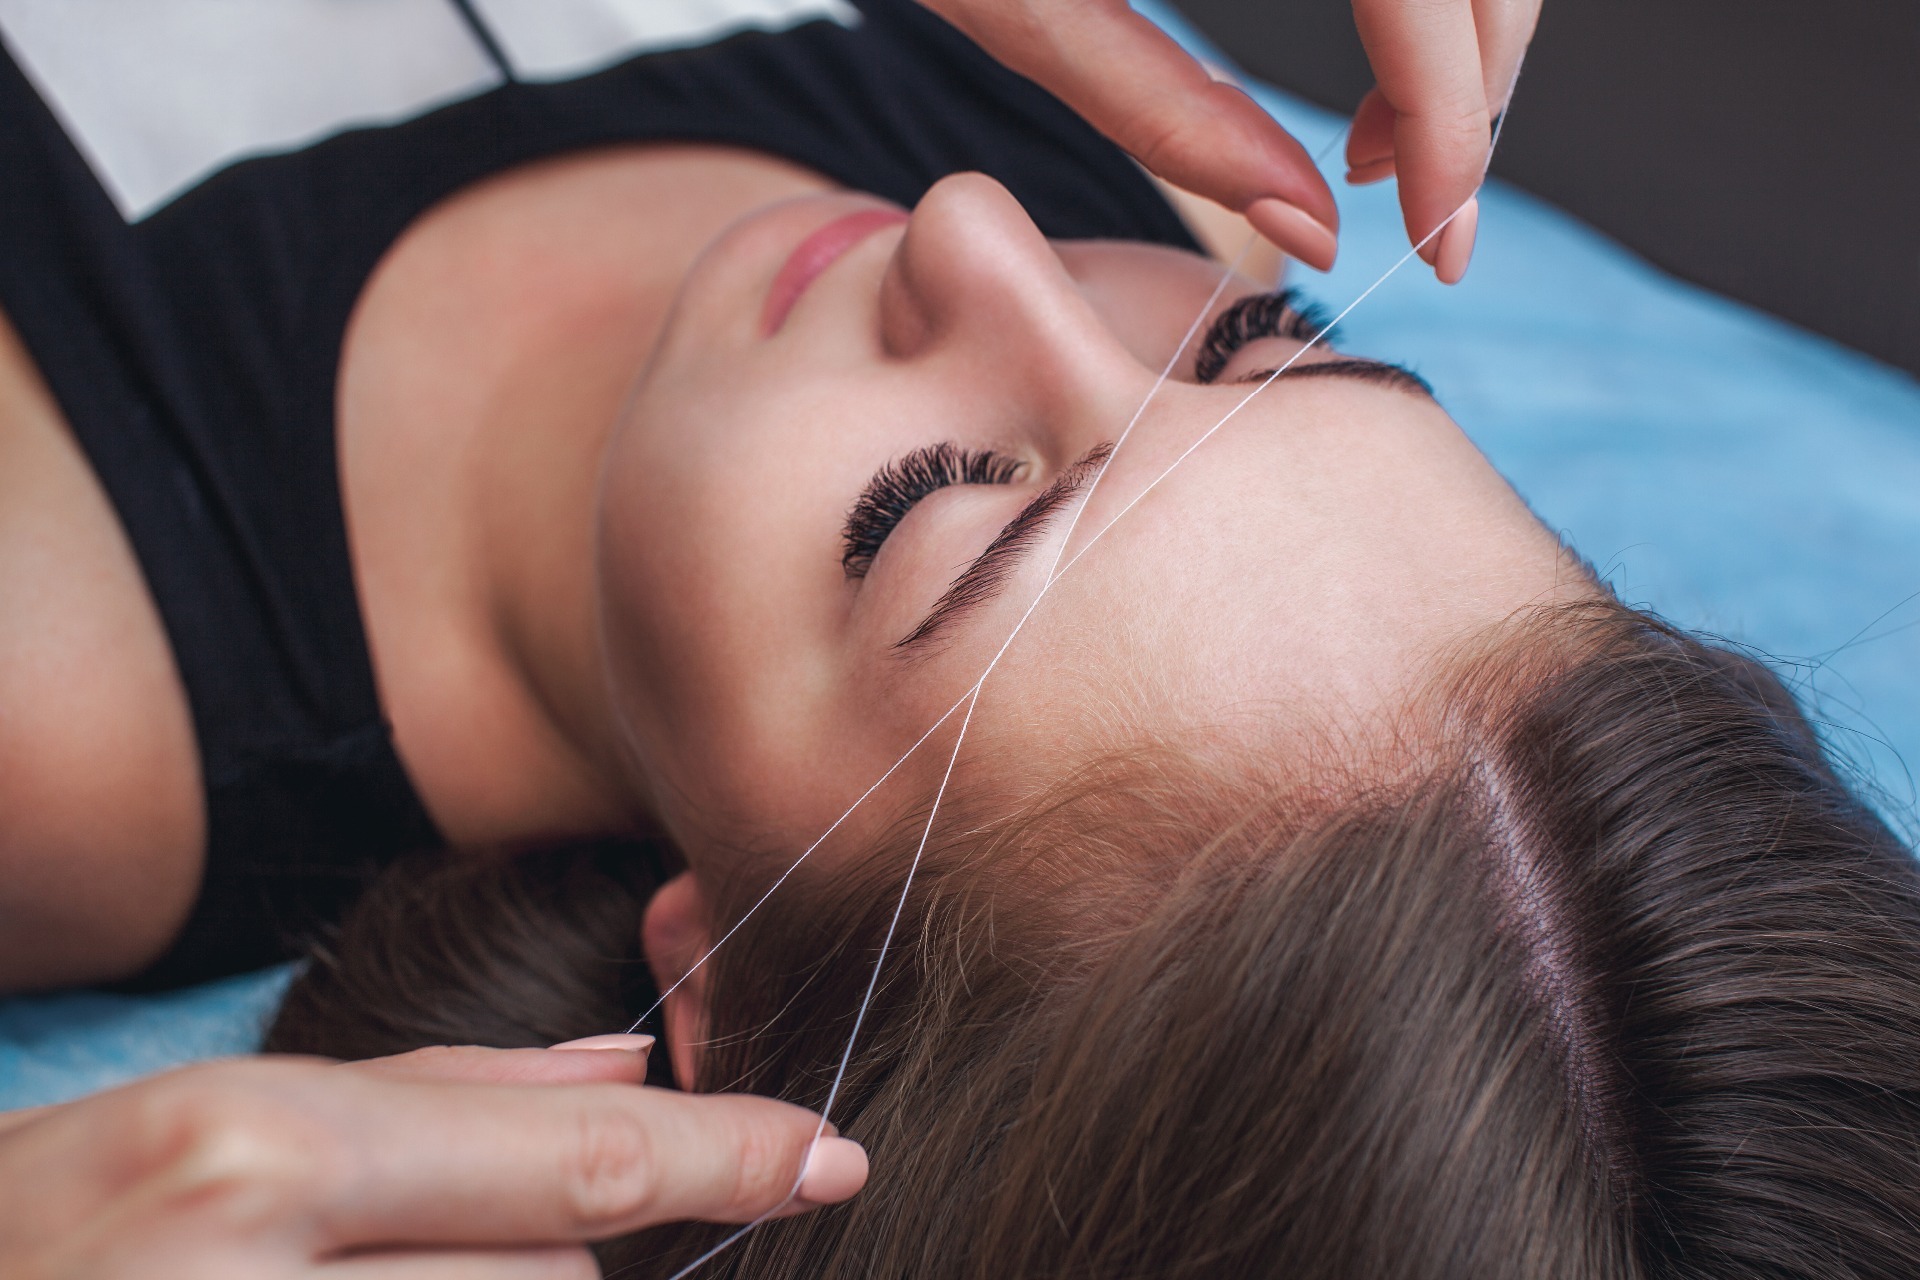 Eyebrow Threading and Shaping Training Course